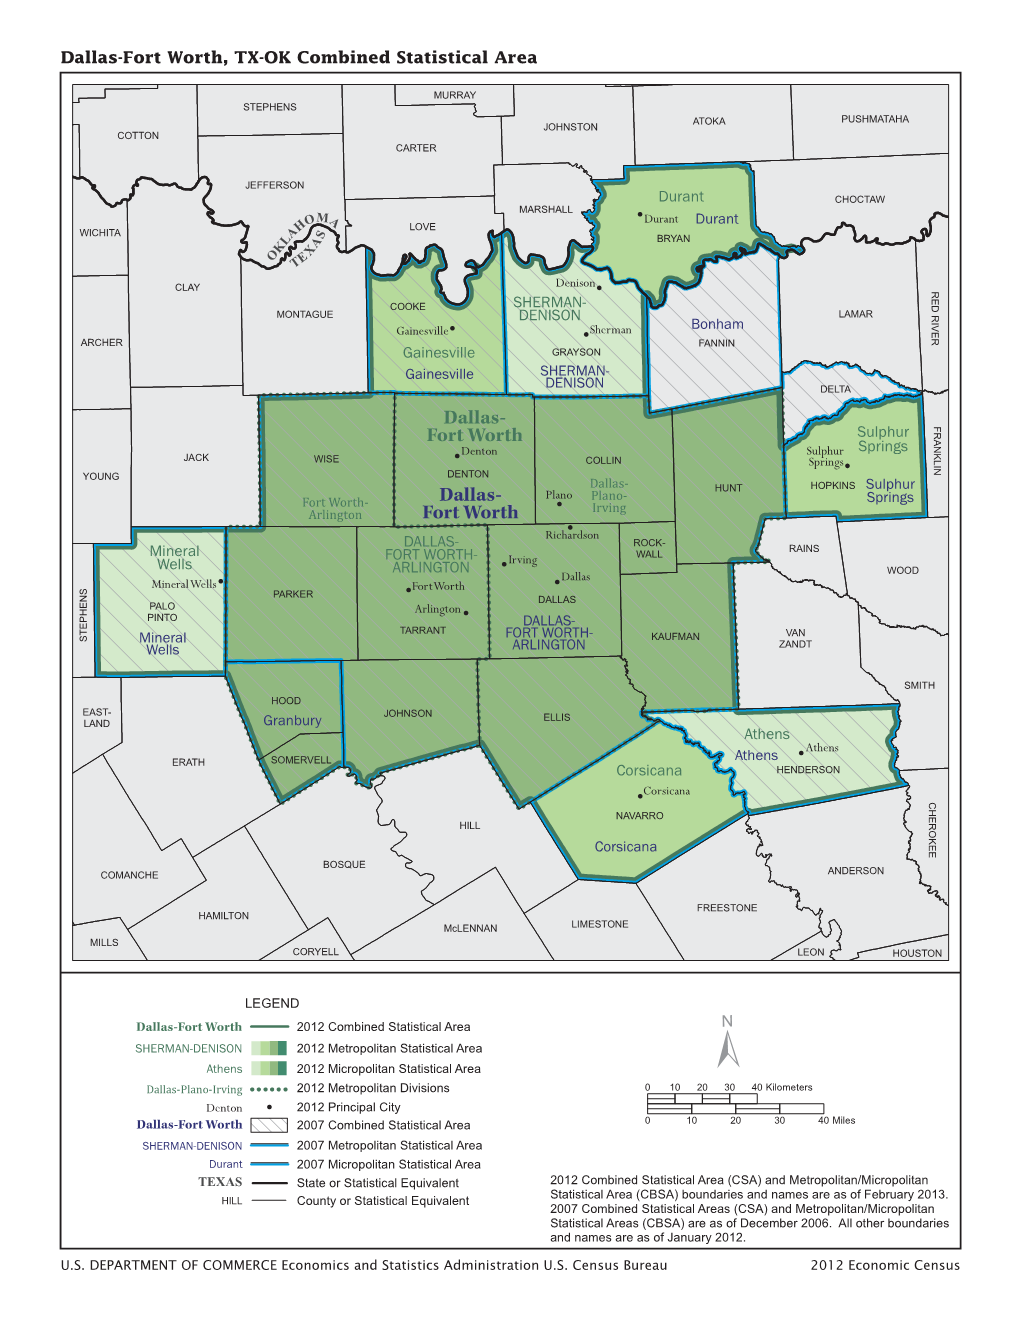 Dallas-Fort Worth, TX-OK Combined Statistical Area